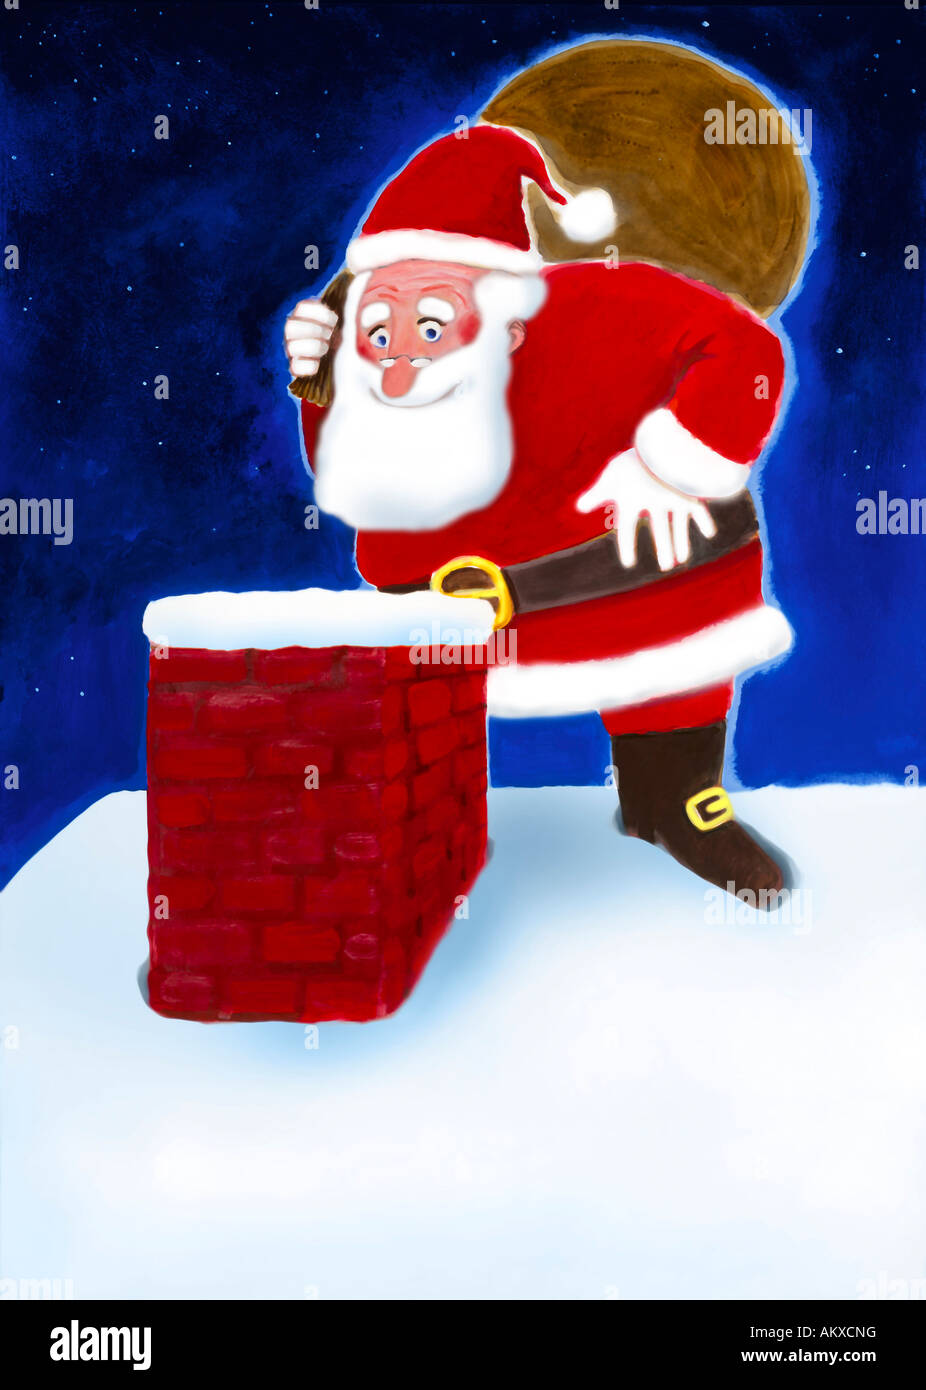 Santa Claus on the roof, looking in the chimney, illustration Stock Photo